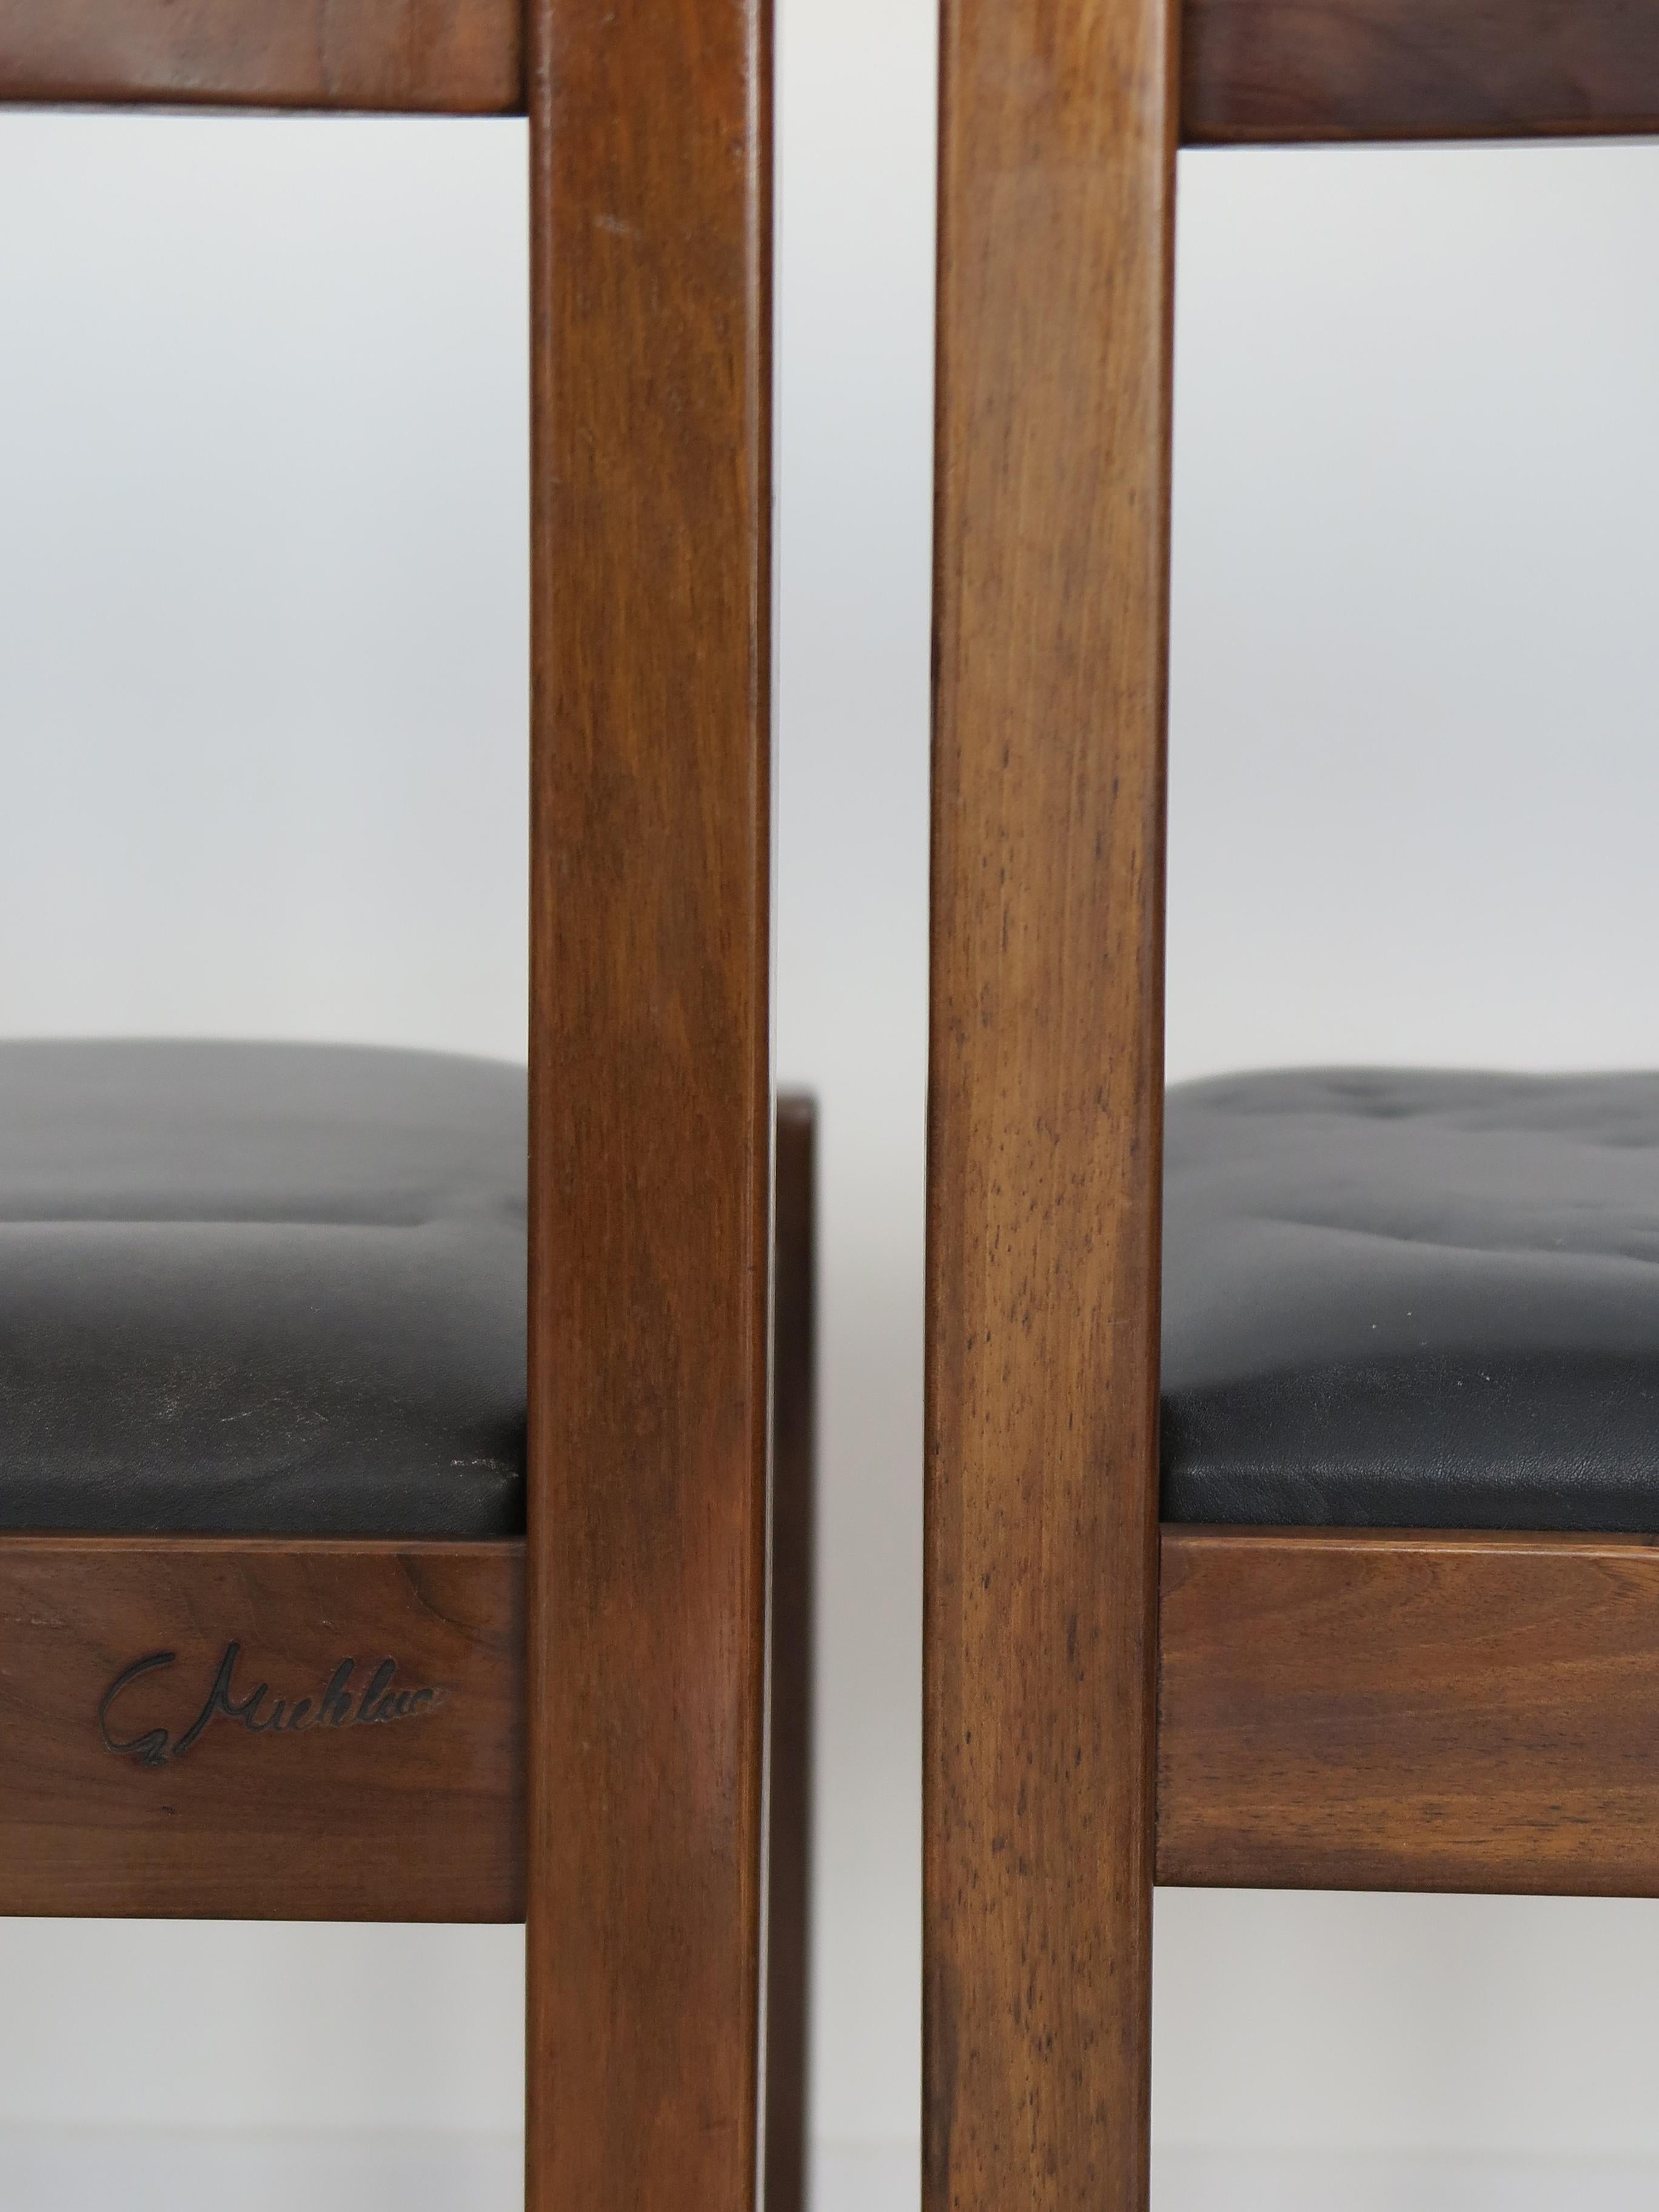 G. Michelucci for Poltronova Italian Midcentury Wood Leather Dining Chairs 1960s For Sale 11